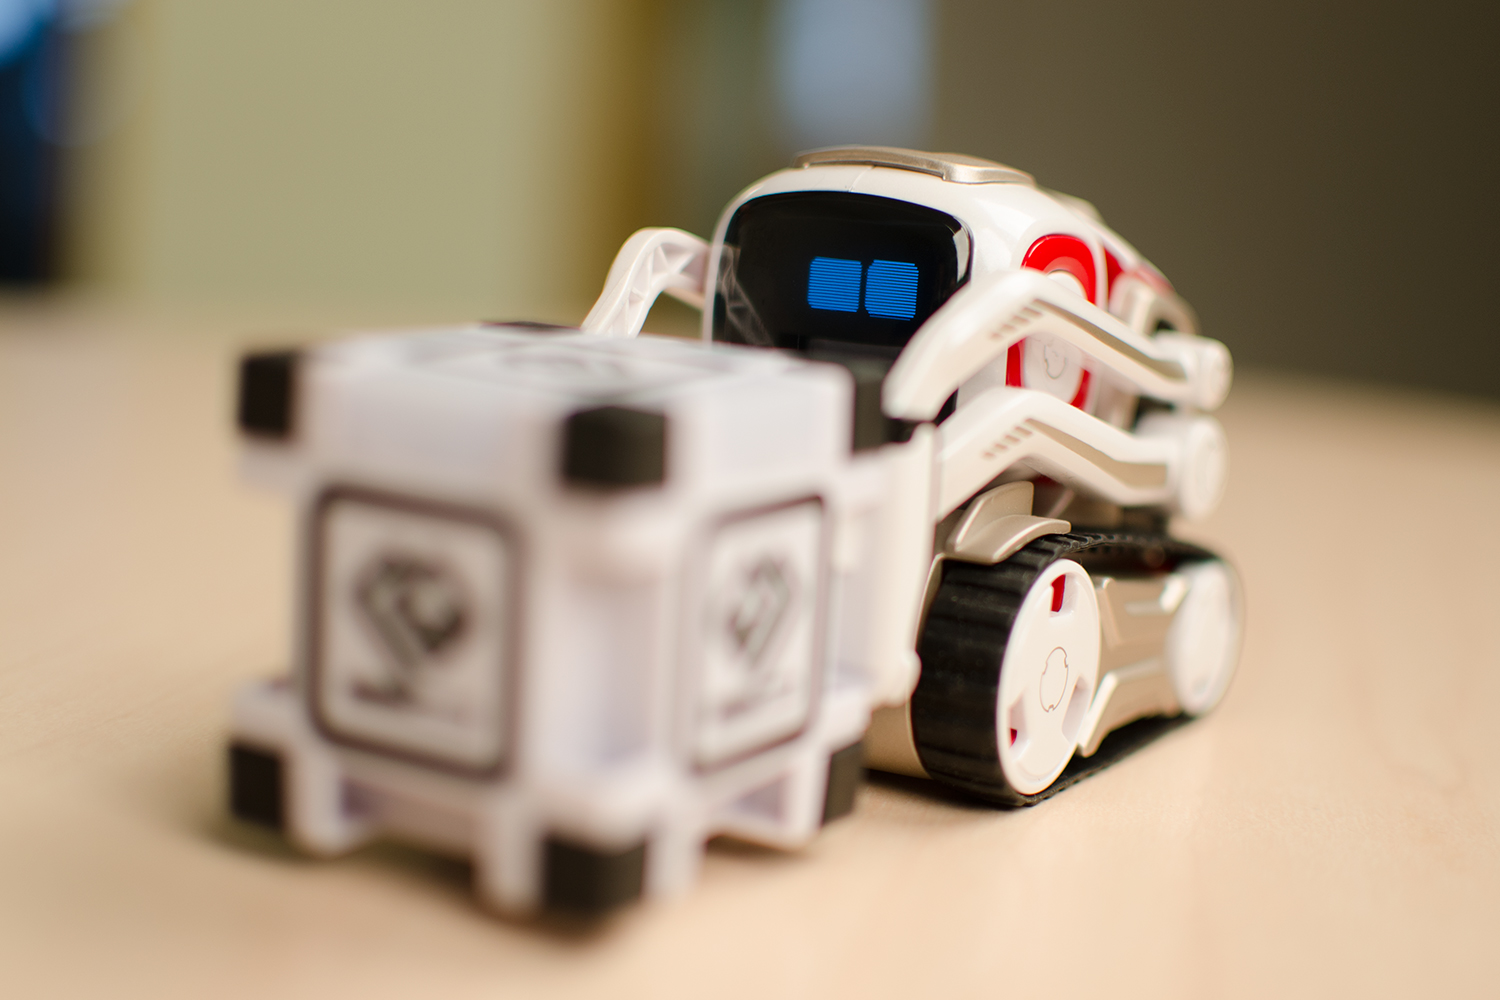 Cozmo preview: The Anki robot friend comes to the UK at last